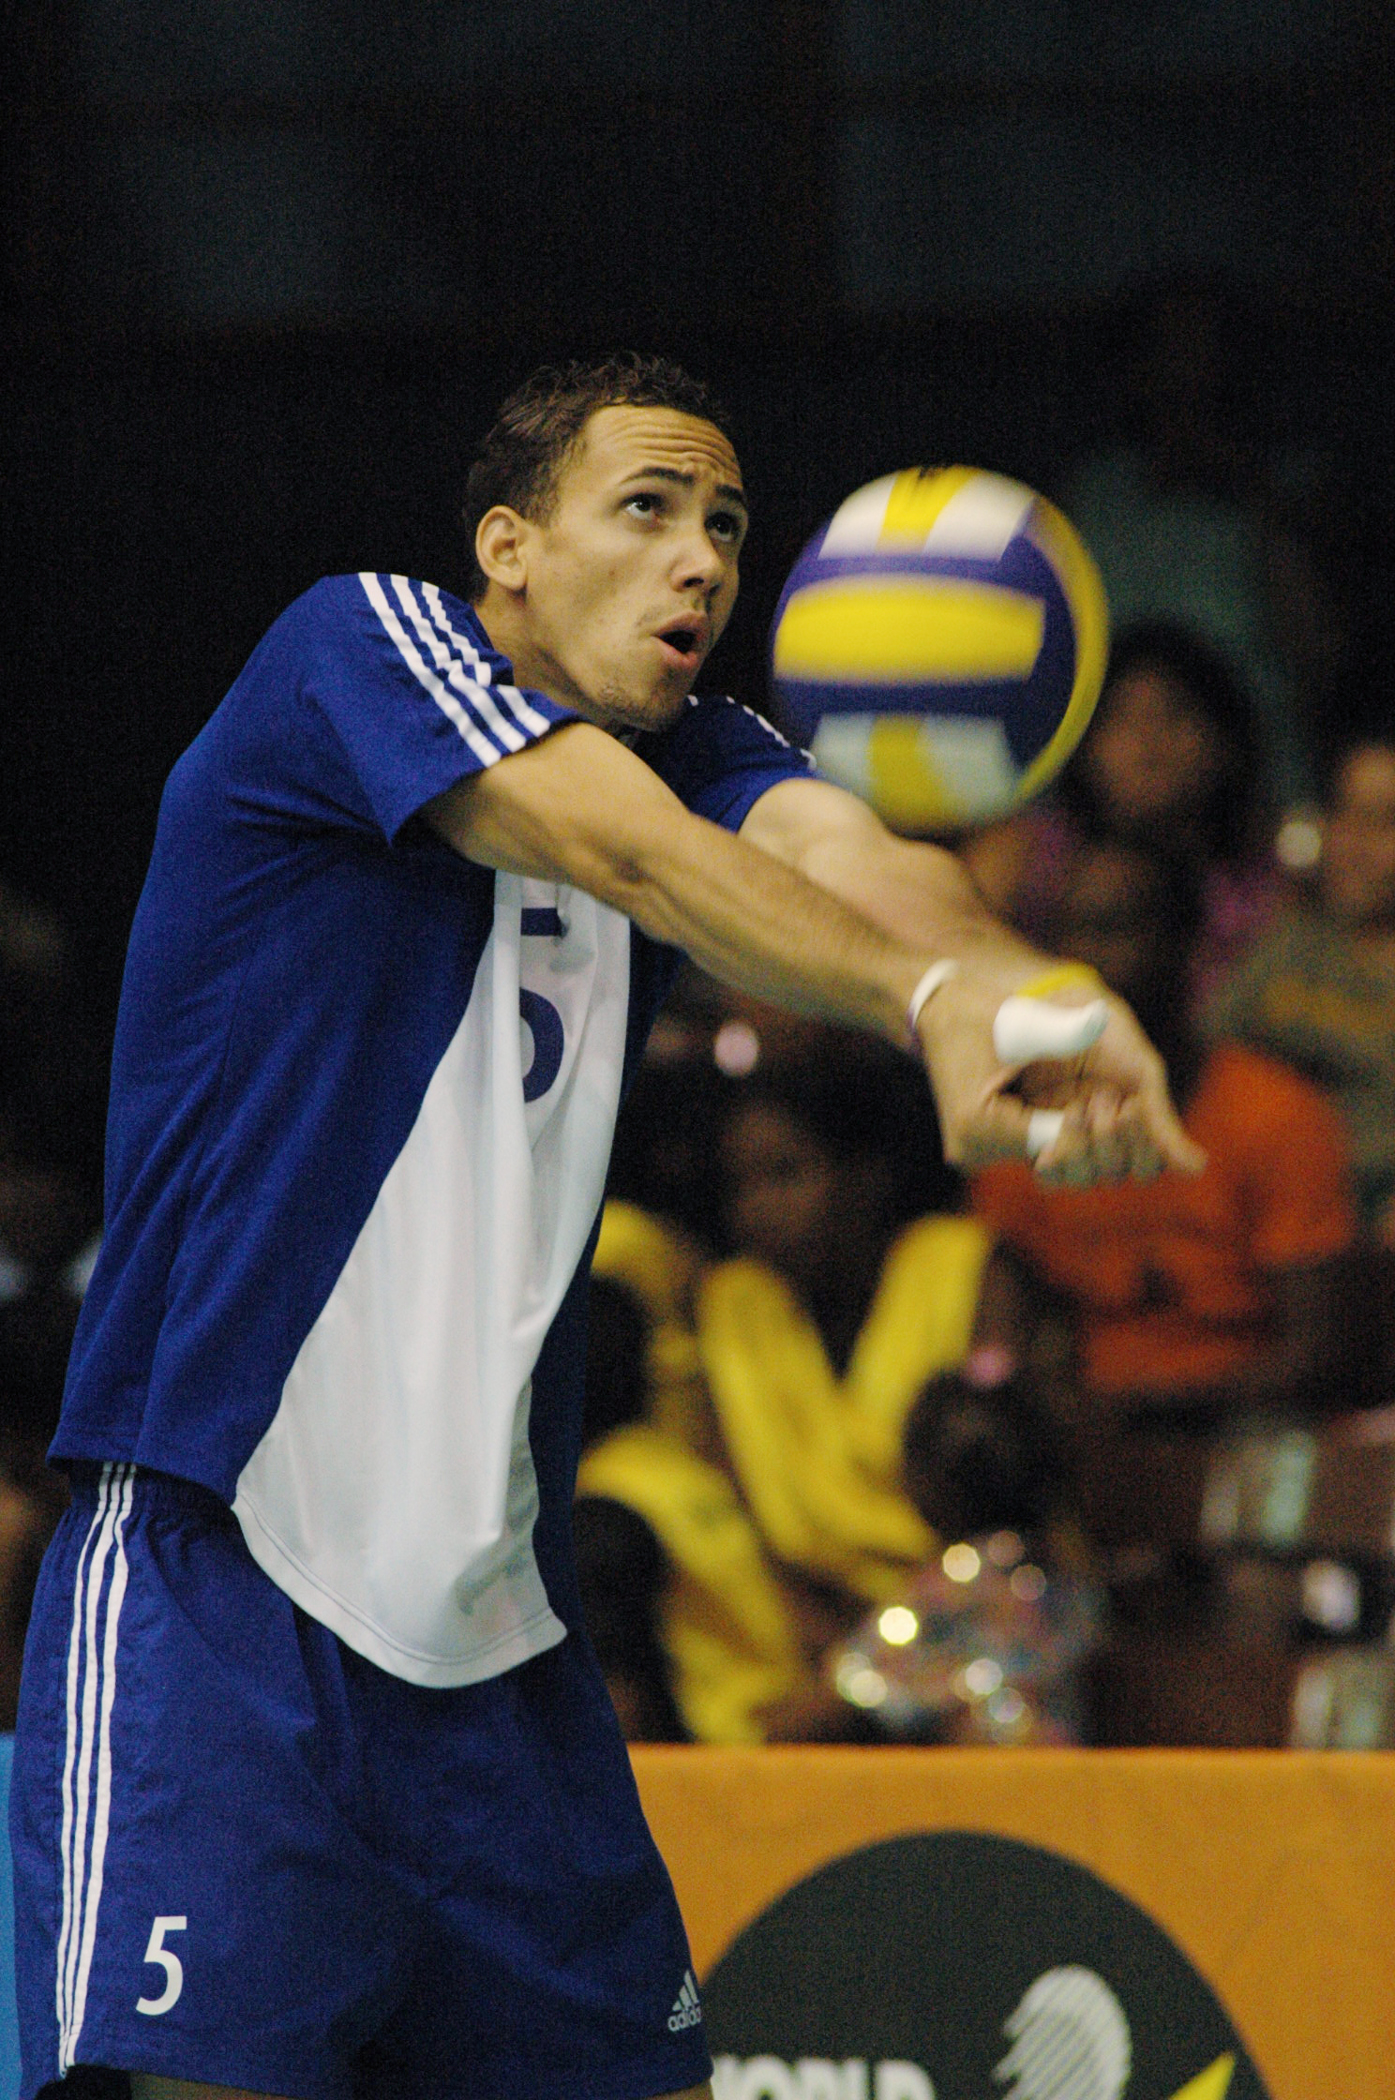 osmany juantorena the best volleyball player 2